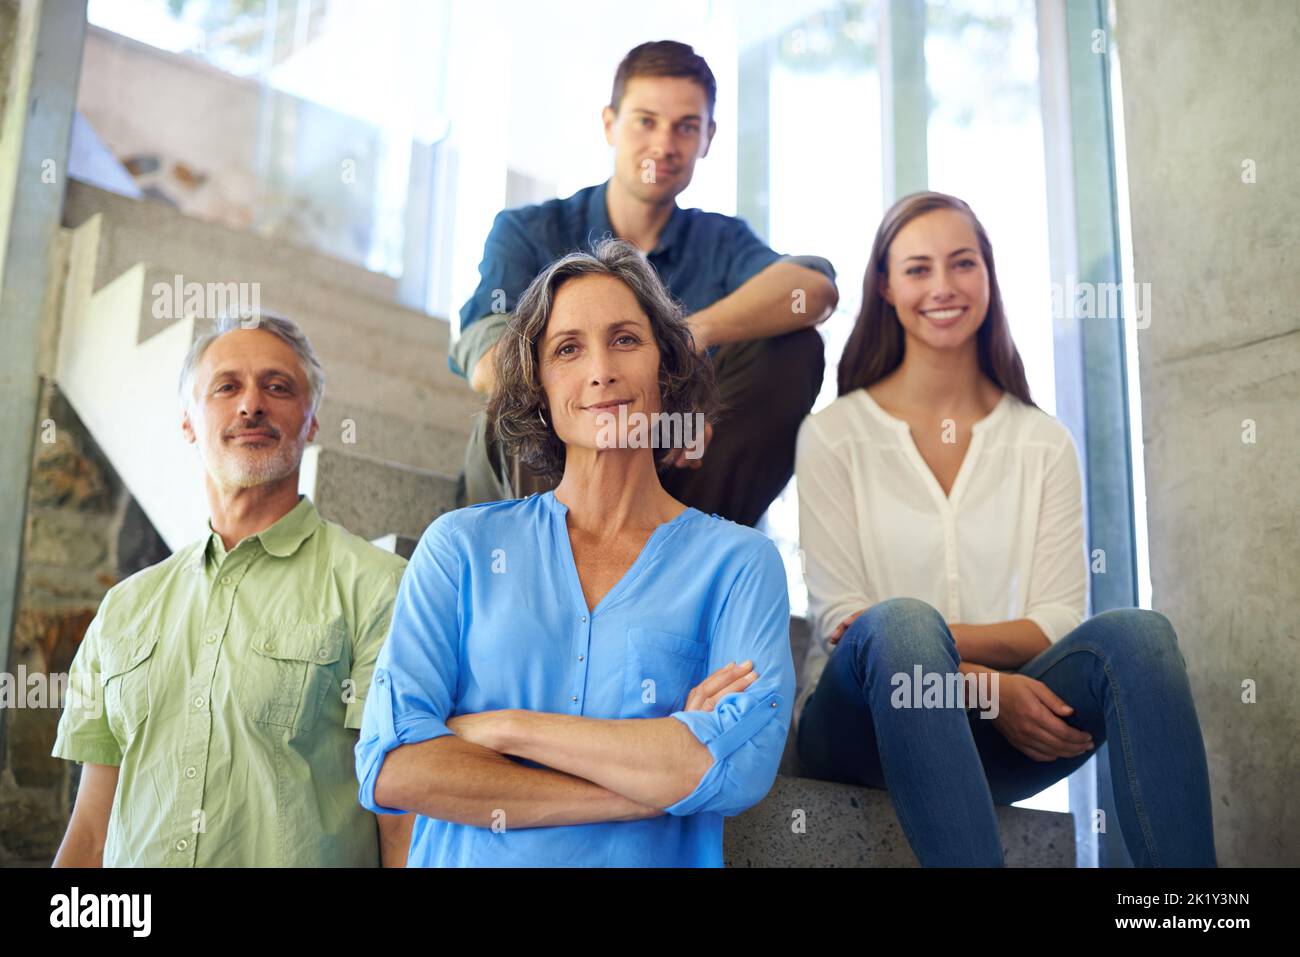 Our focus is always on the happines of our family. a mother and father standing in front of their adult children on the stairs. Stock Photo